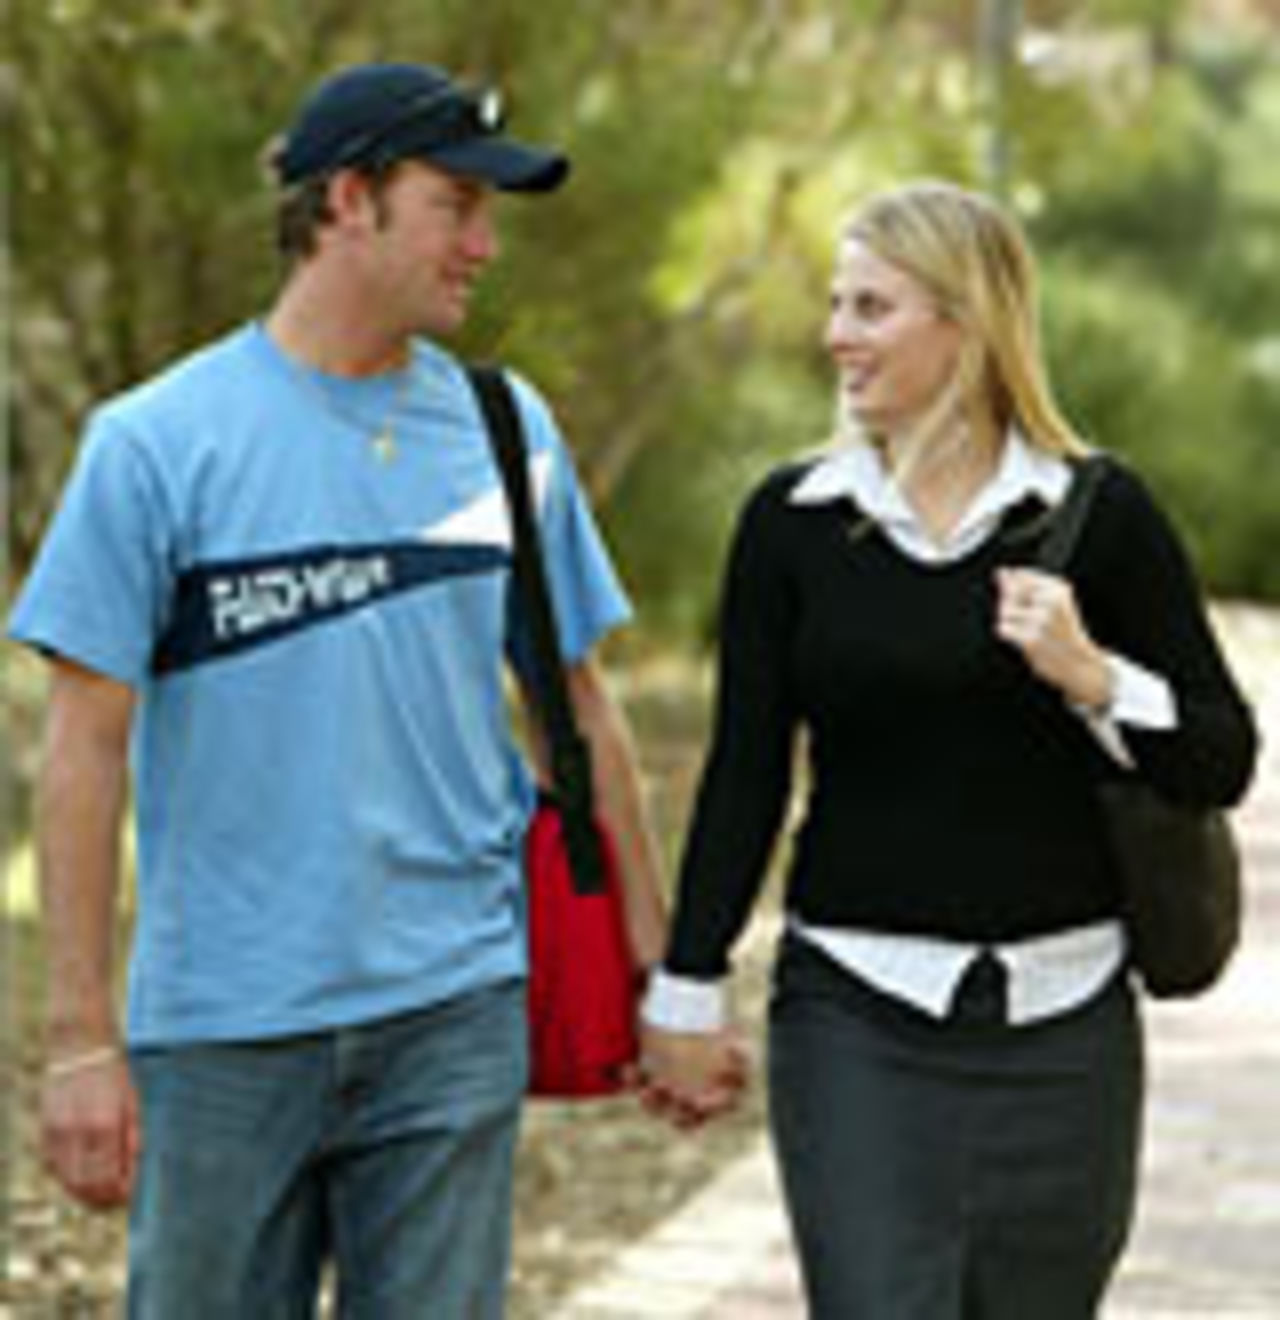 Sean Ervine chats with his partner Melissa Marsh, Perth, May 17, 2004